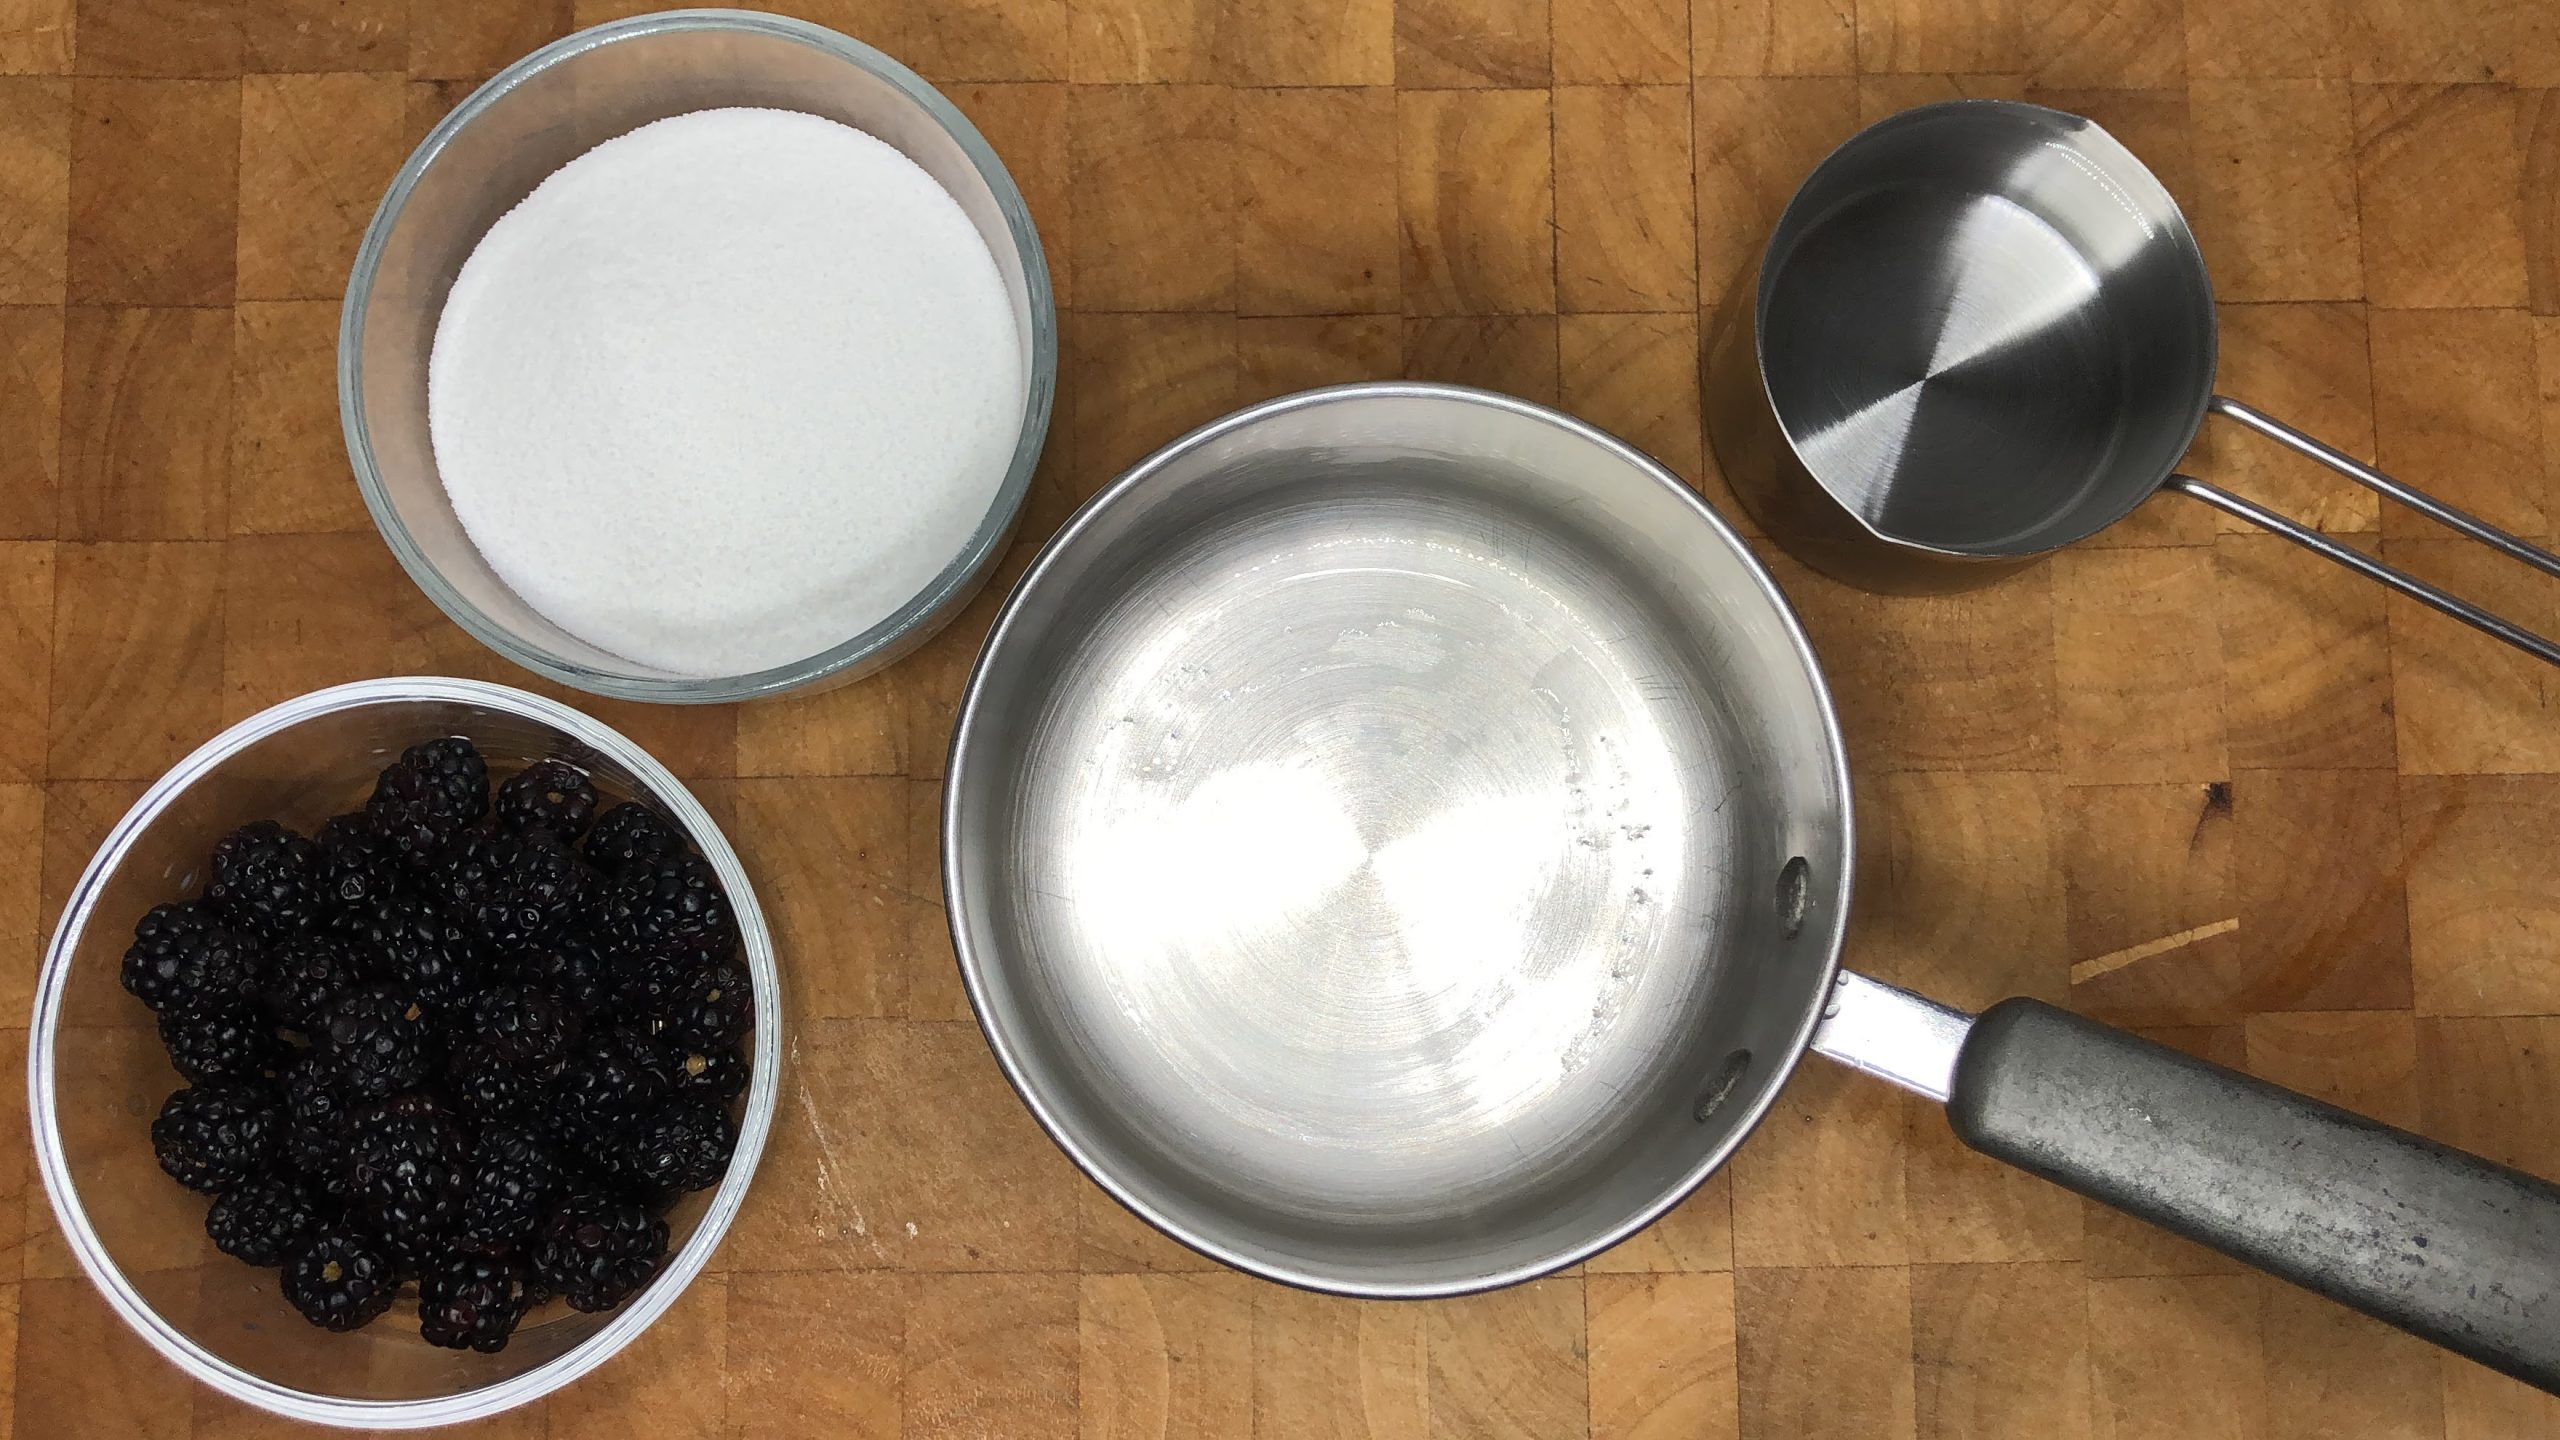 Bowls of sugar, water and blackberries next to an empty pot.